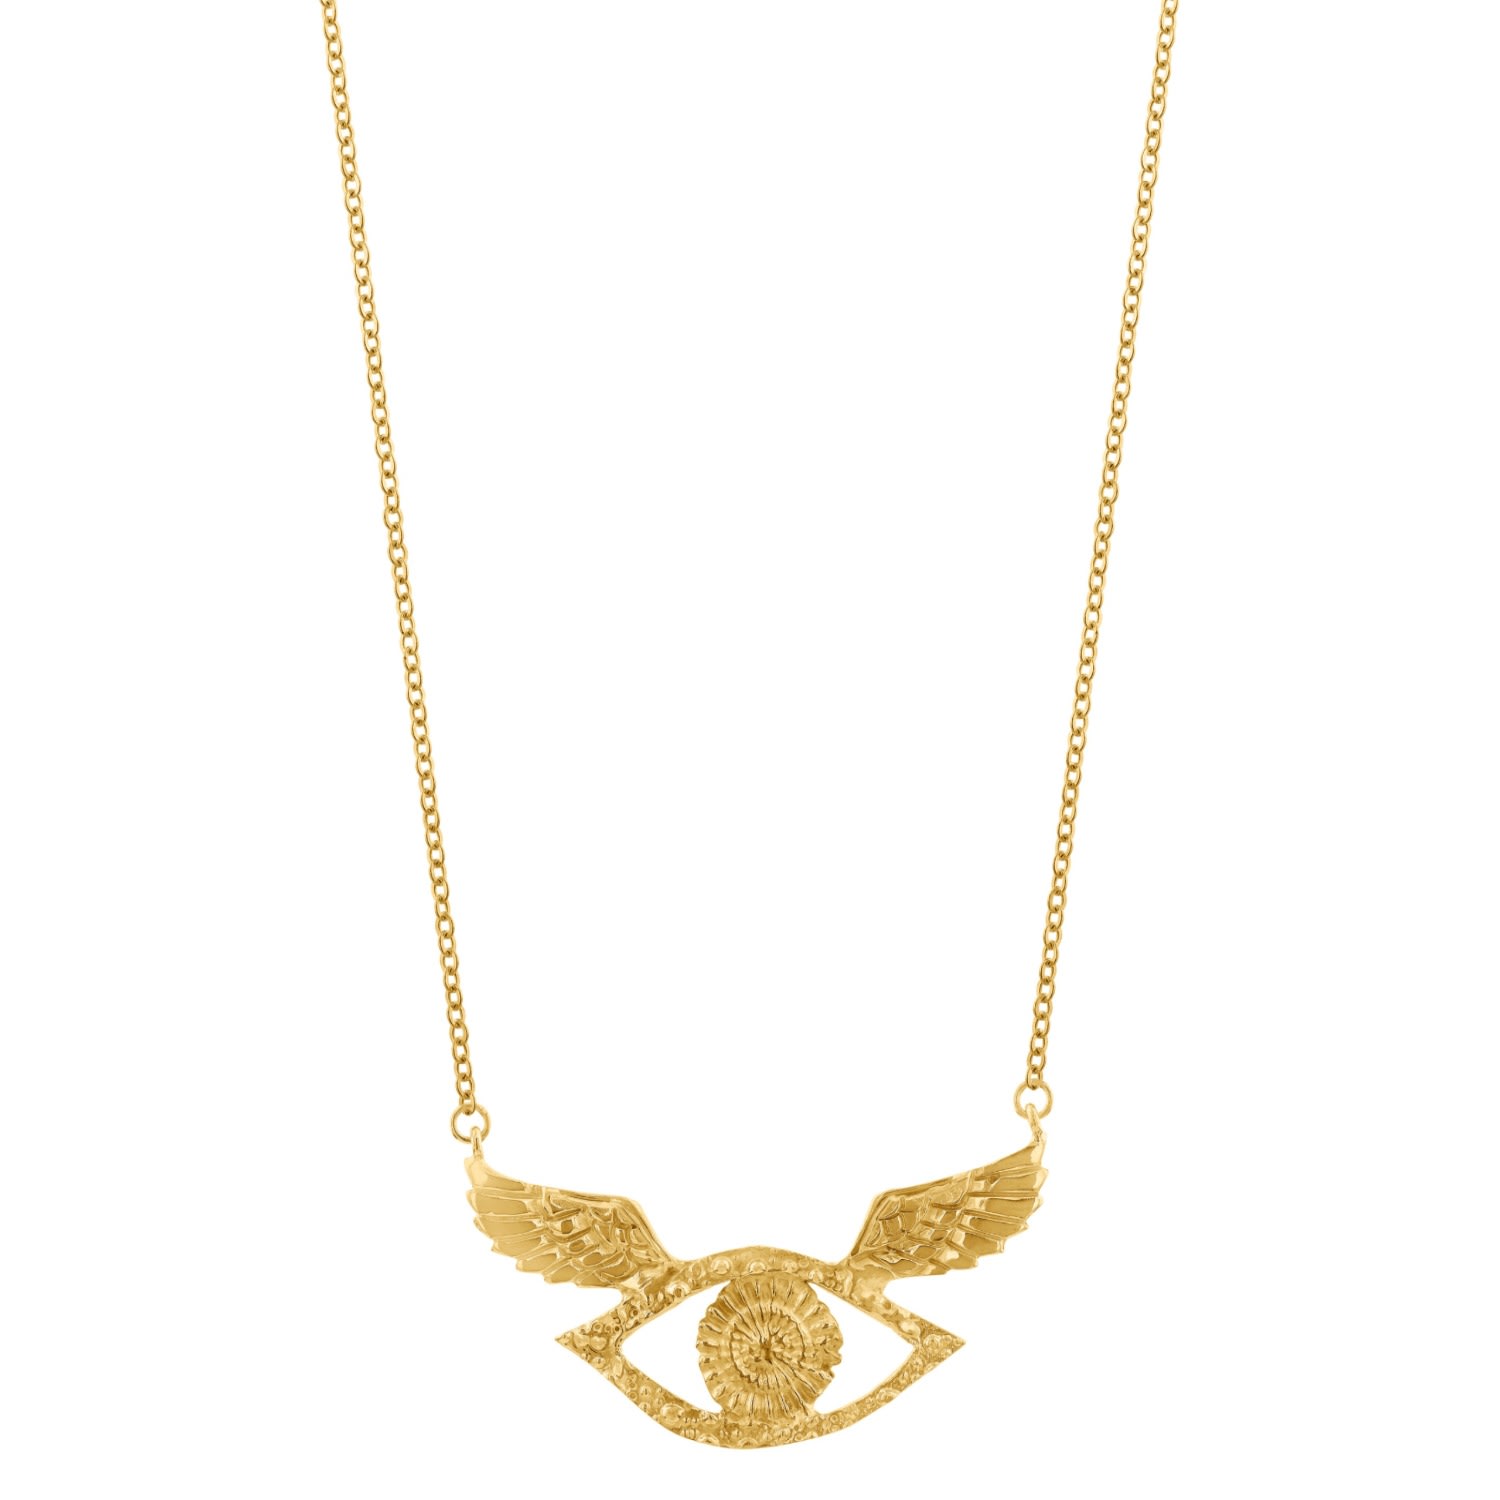 Women’s Gold Eyes Wings Necklace Sophie Simone Designs